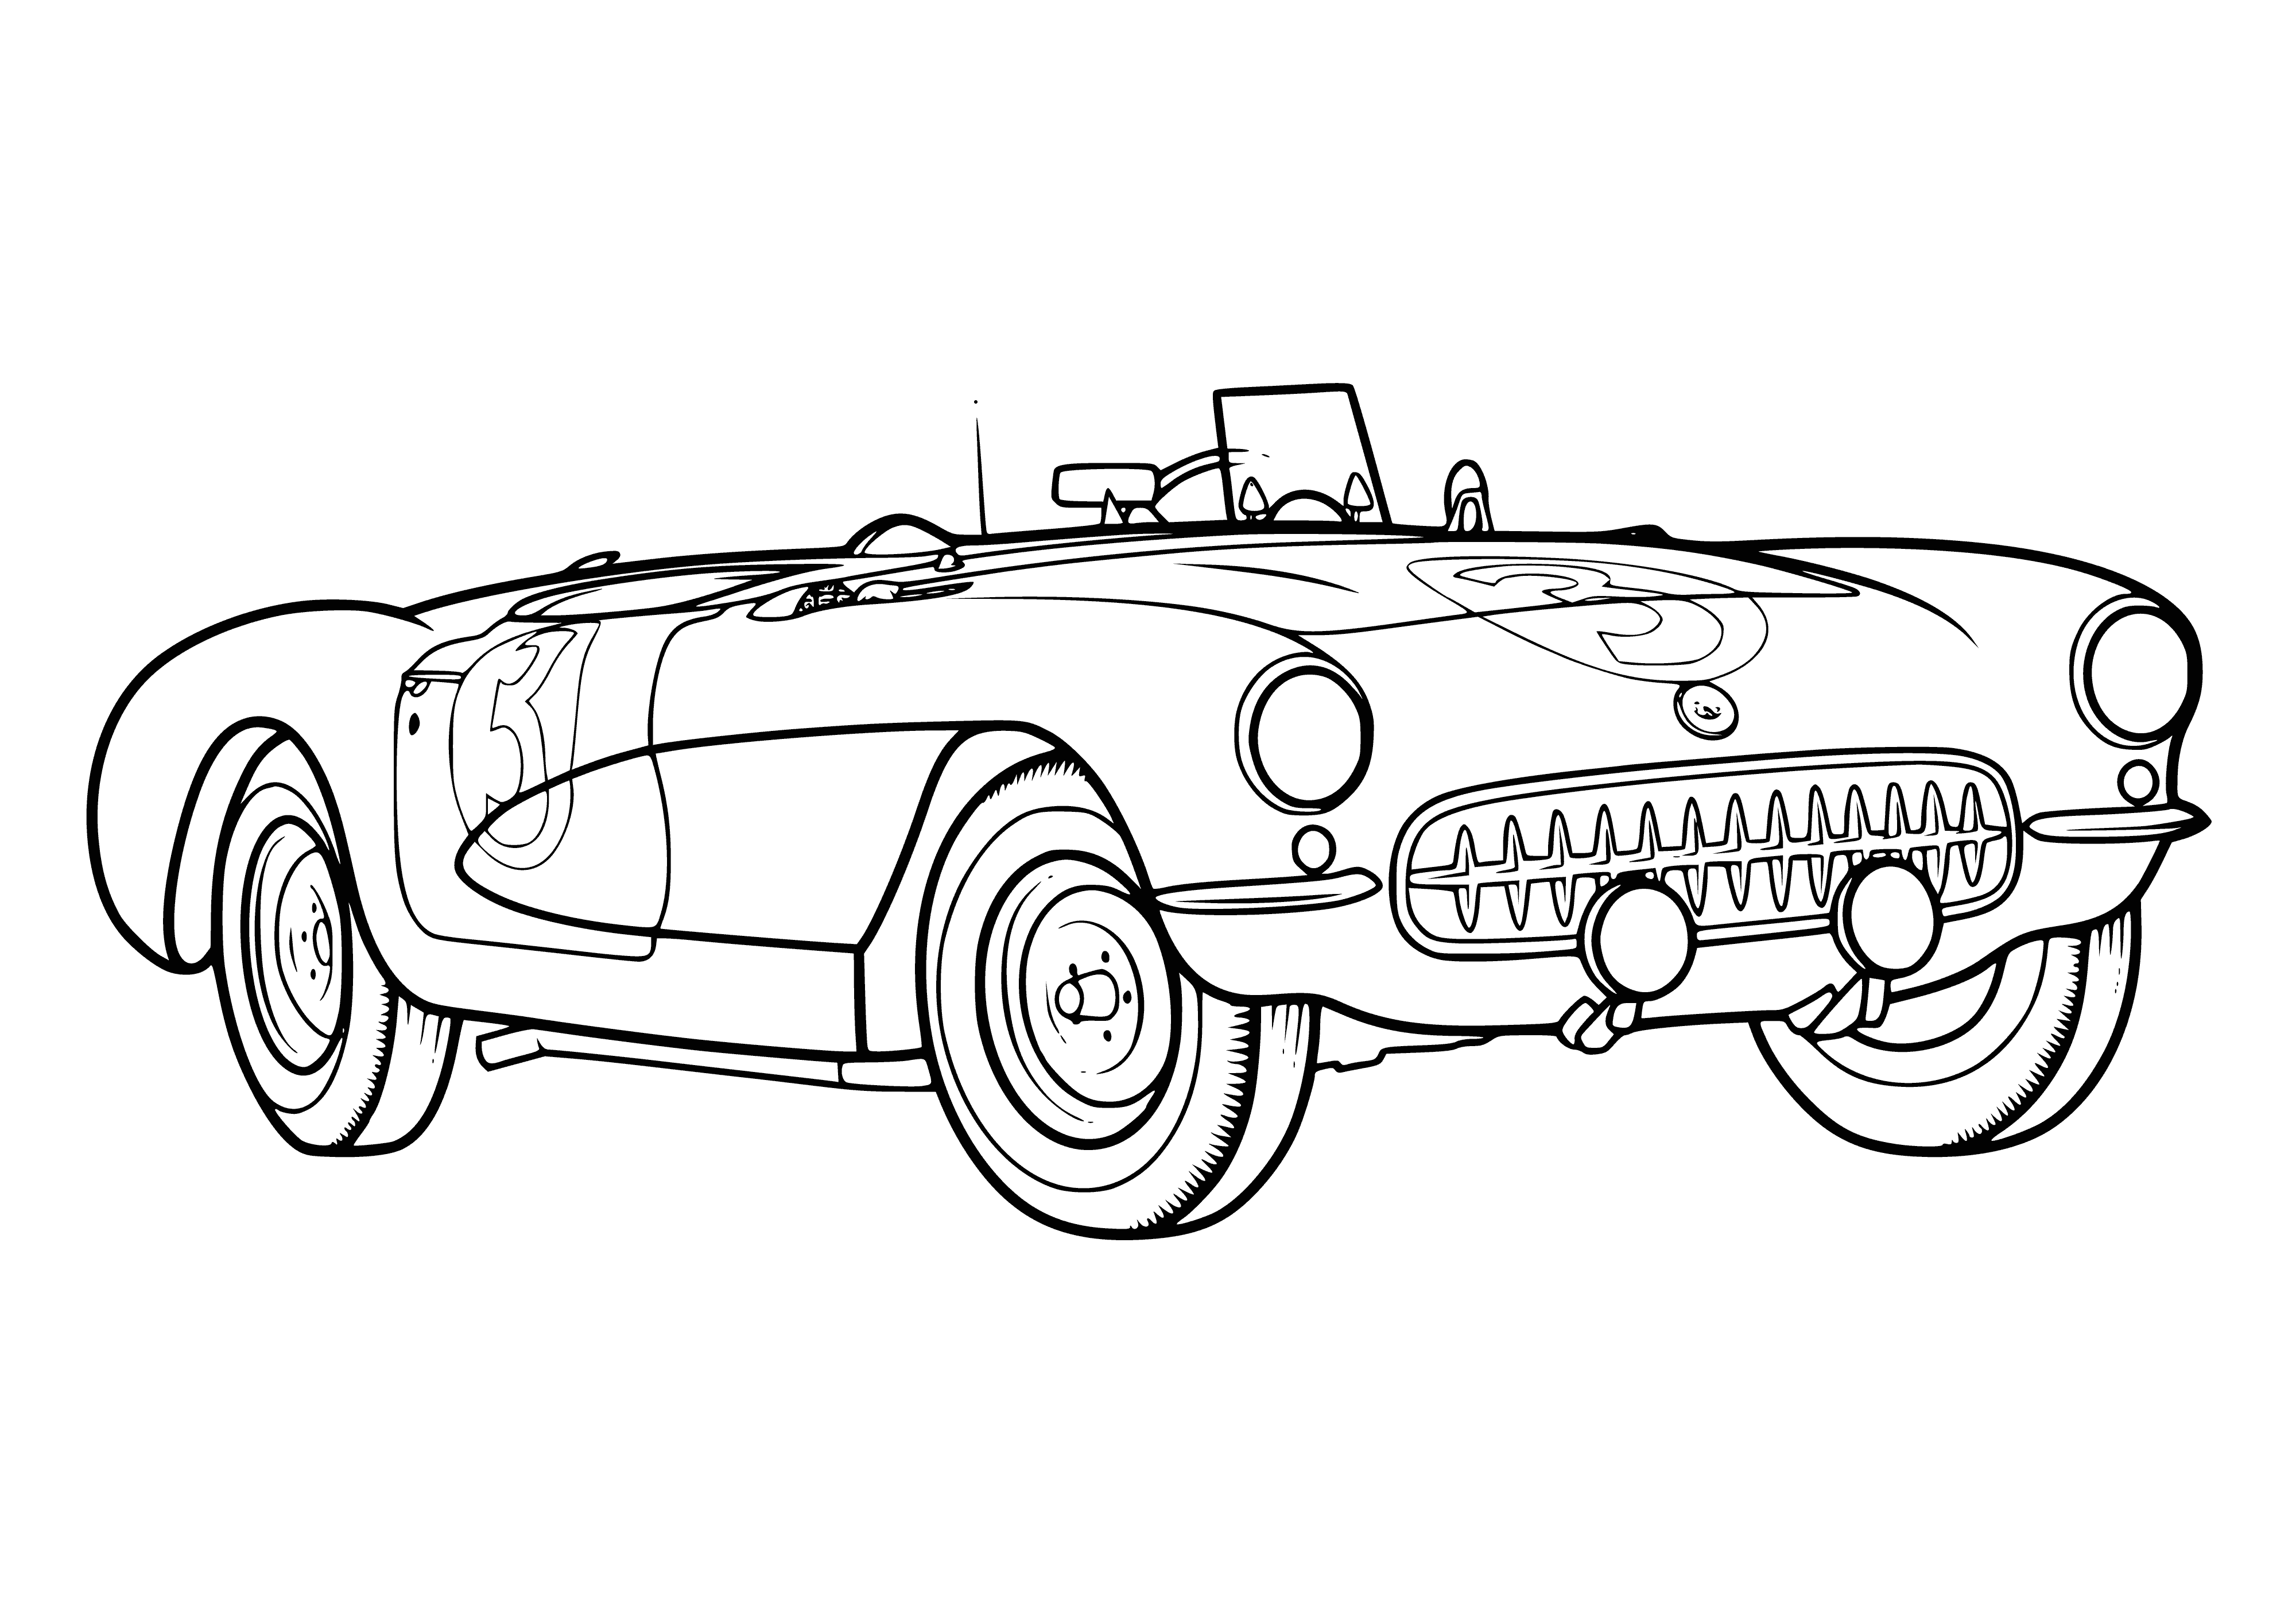 Open car coloring page